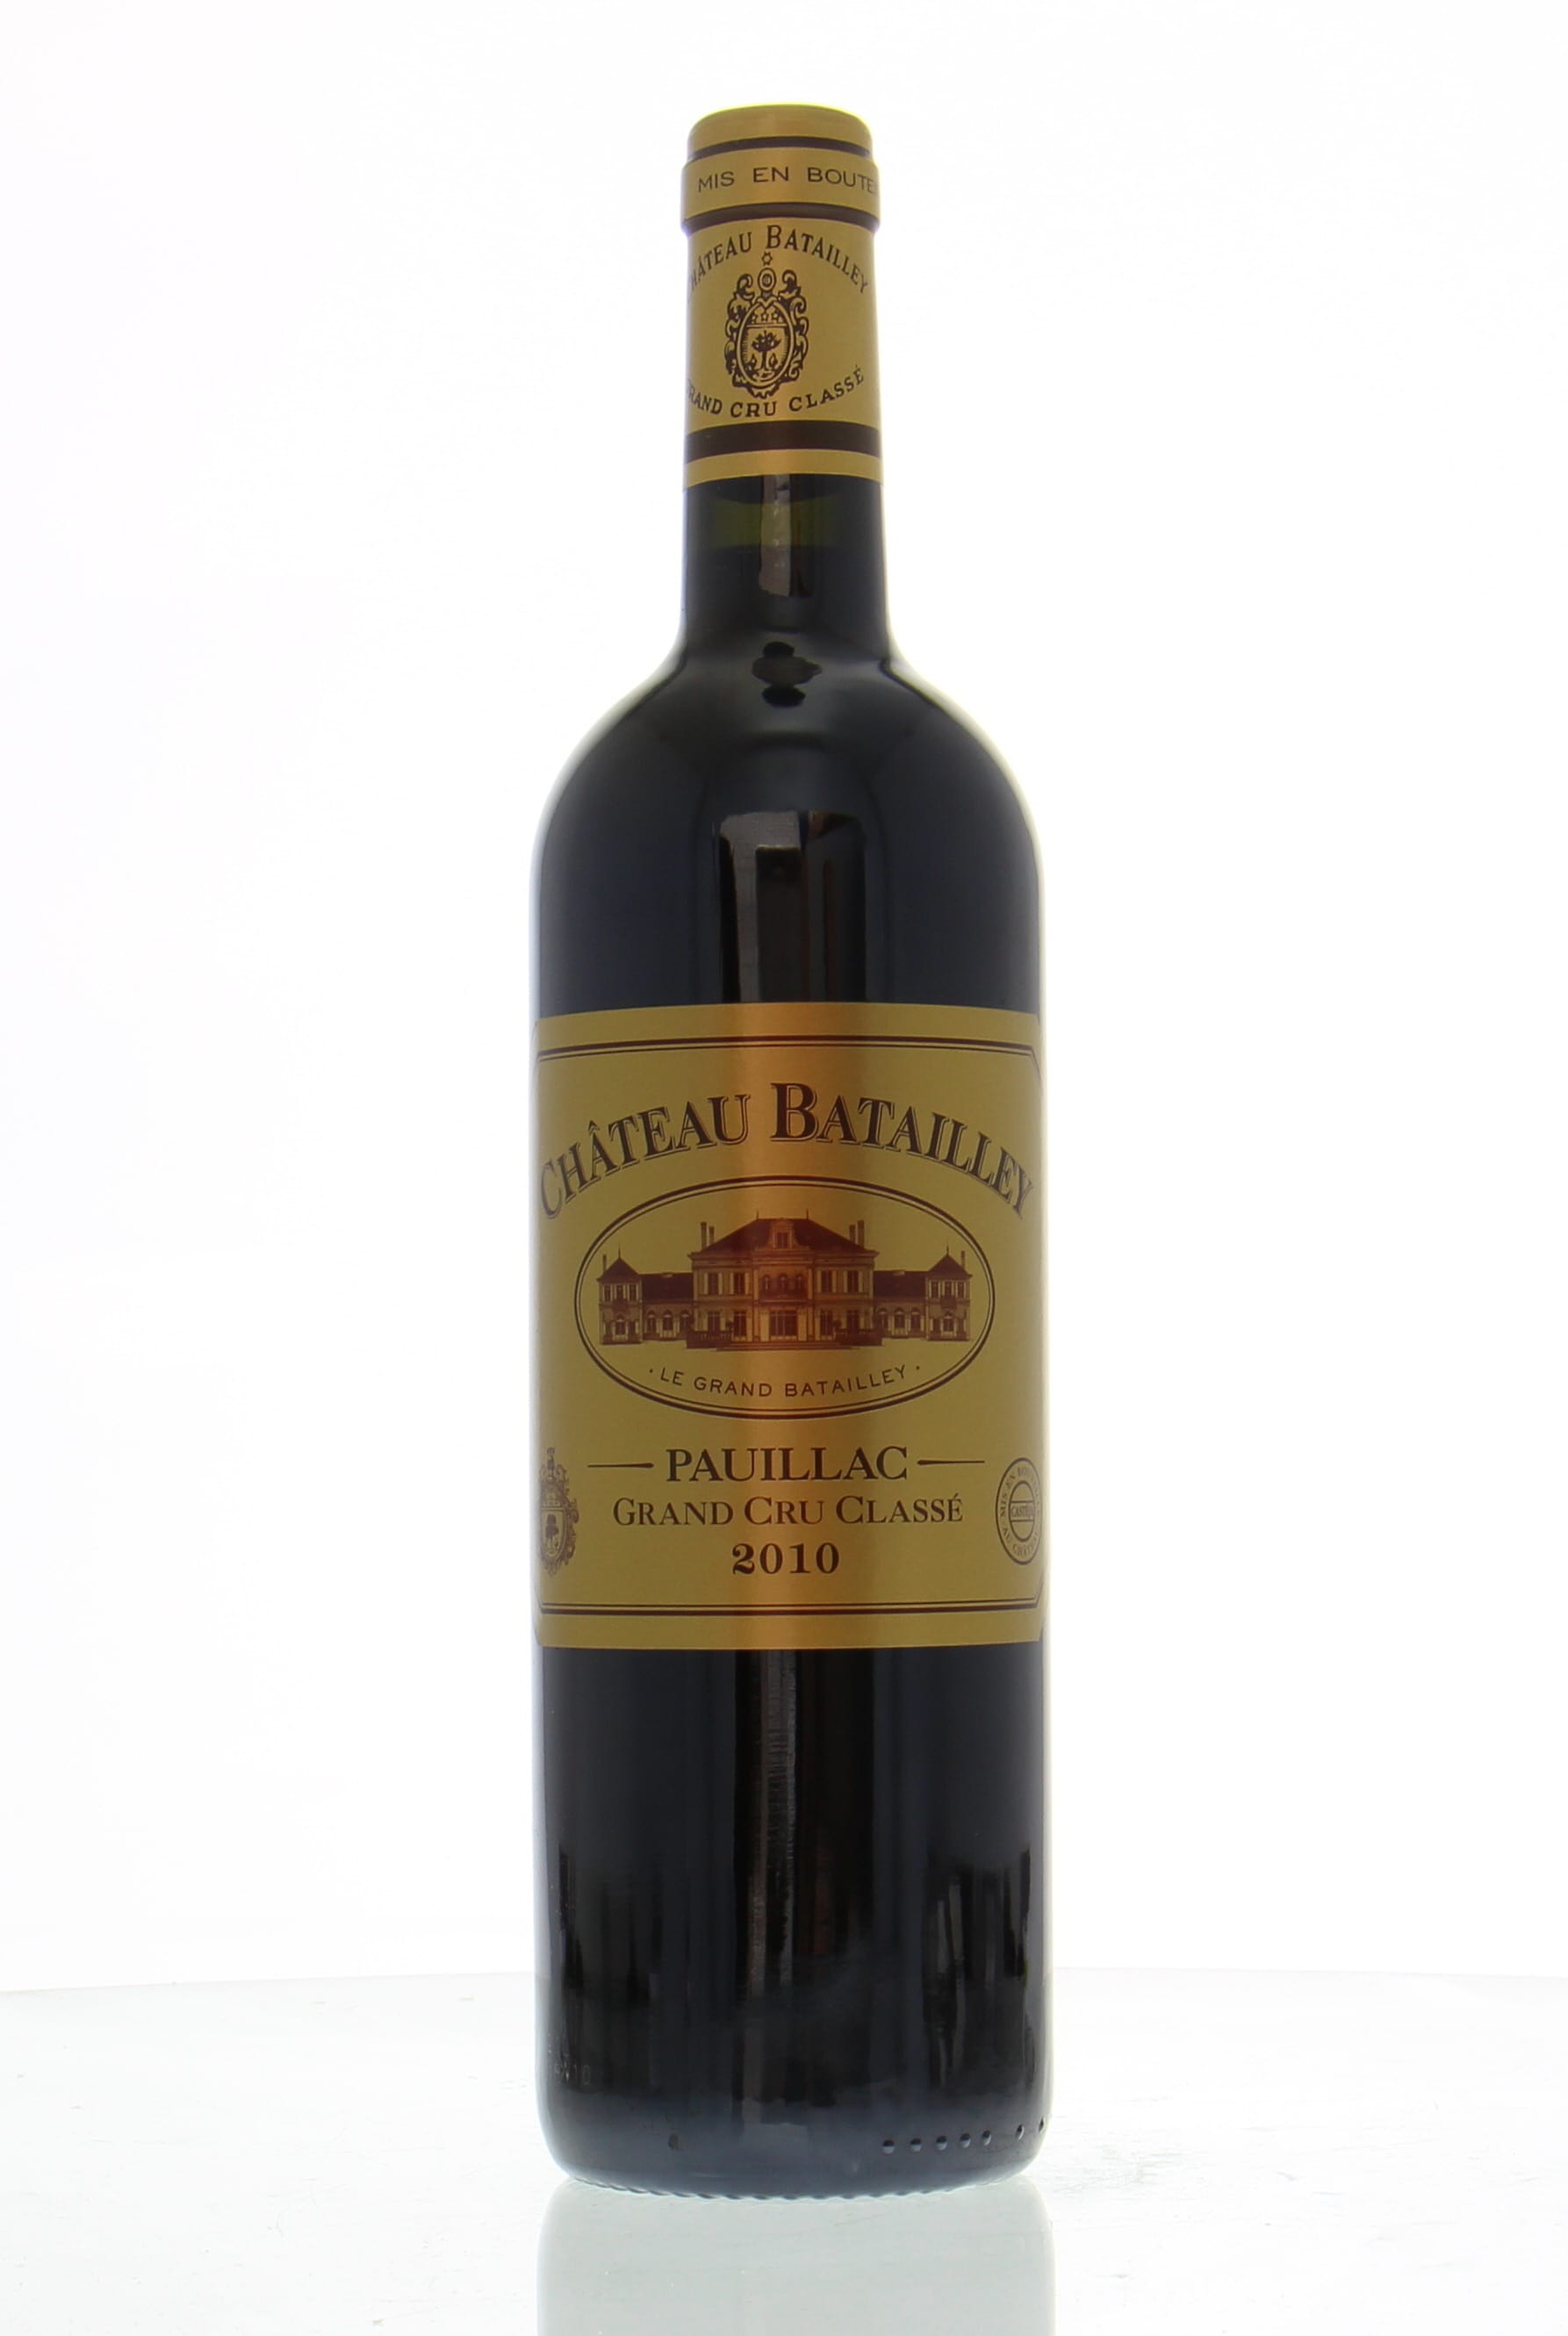 Chateau Batailley - Chateau Batailley 2010 Perfect